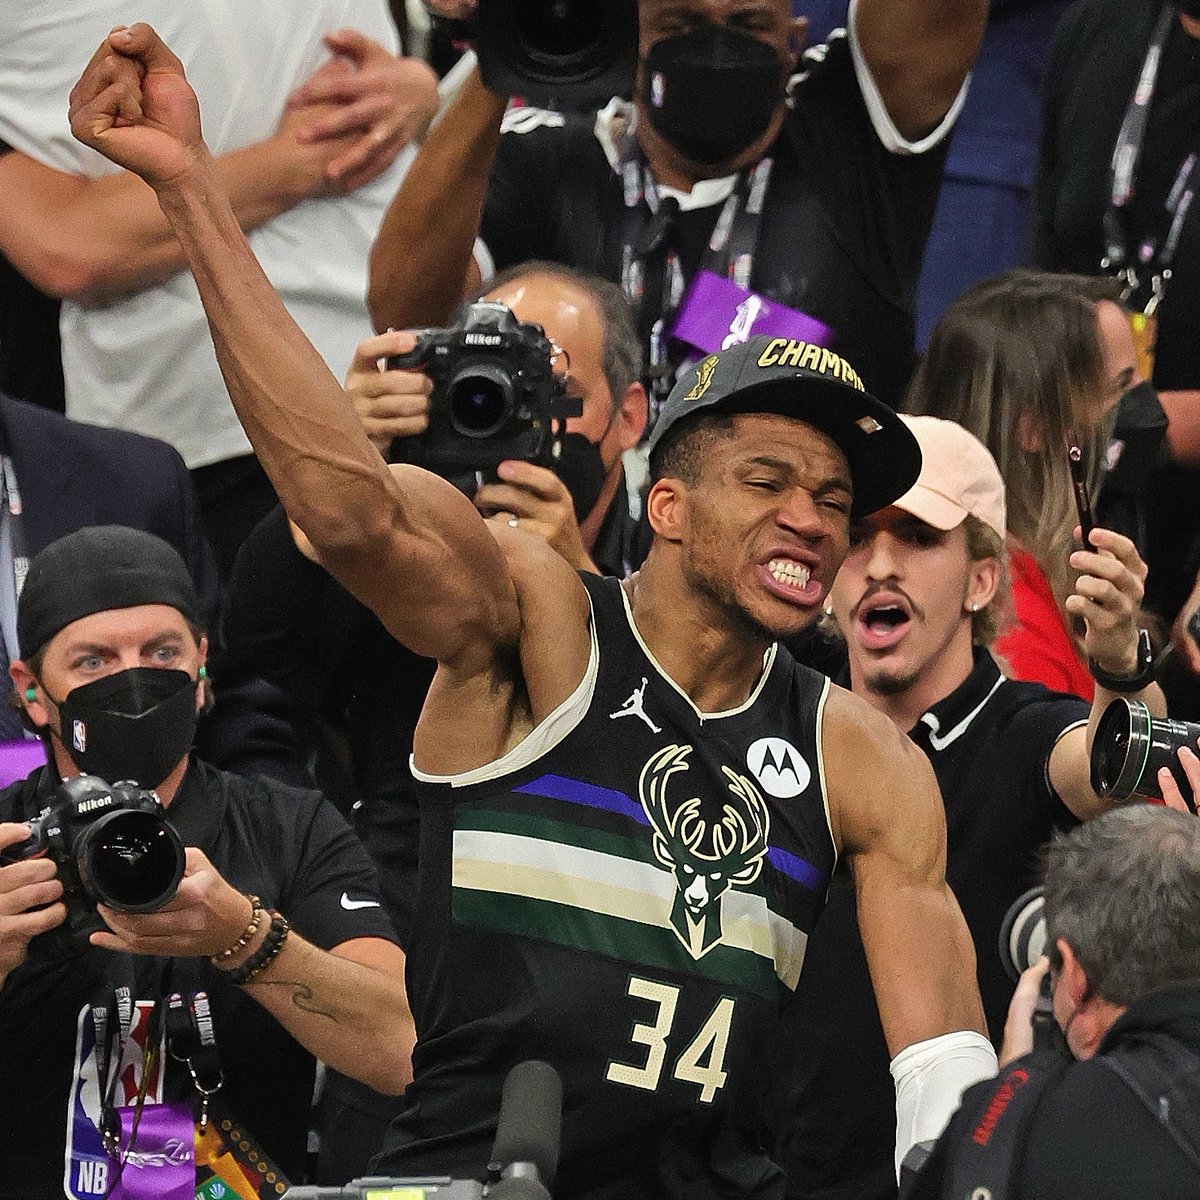 Giannis Antetokounmpo game 6 of the 2021 NBA Finals:

50 PTS
74.9 TS%
16/25 FG
17/19 FT
14 RBS
5 BLK

Arguably the greatest Finals closeout performance in NBA history. Three 40+ point games in the Finals coming off injury. Superhuman effort that should never be forgotten.